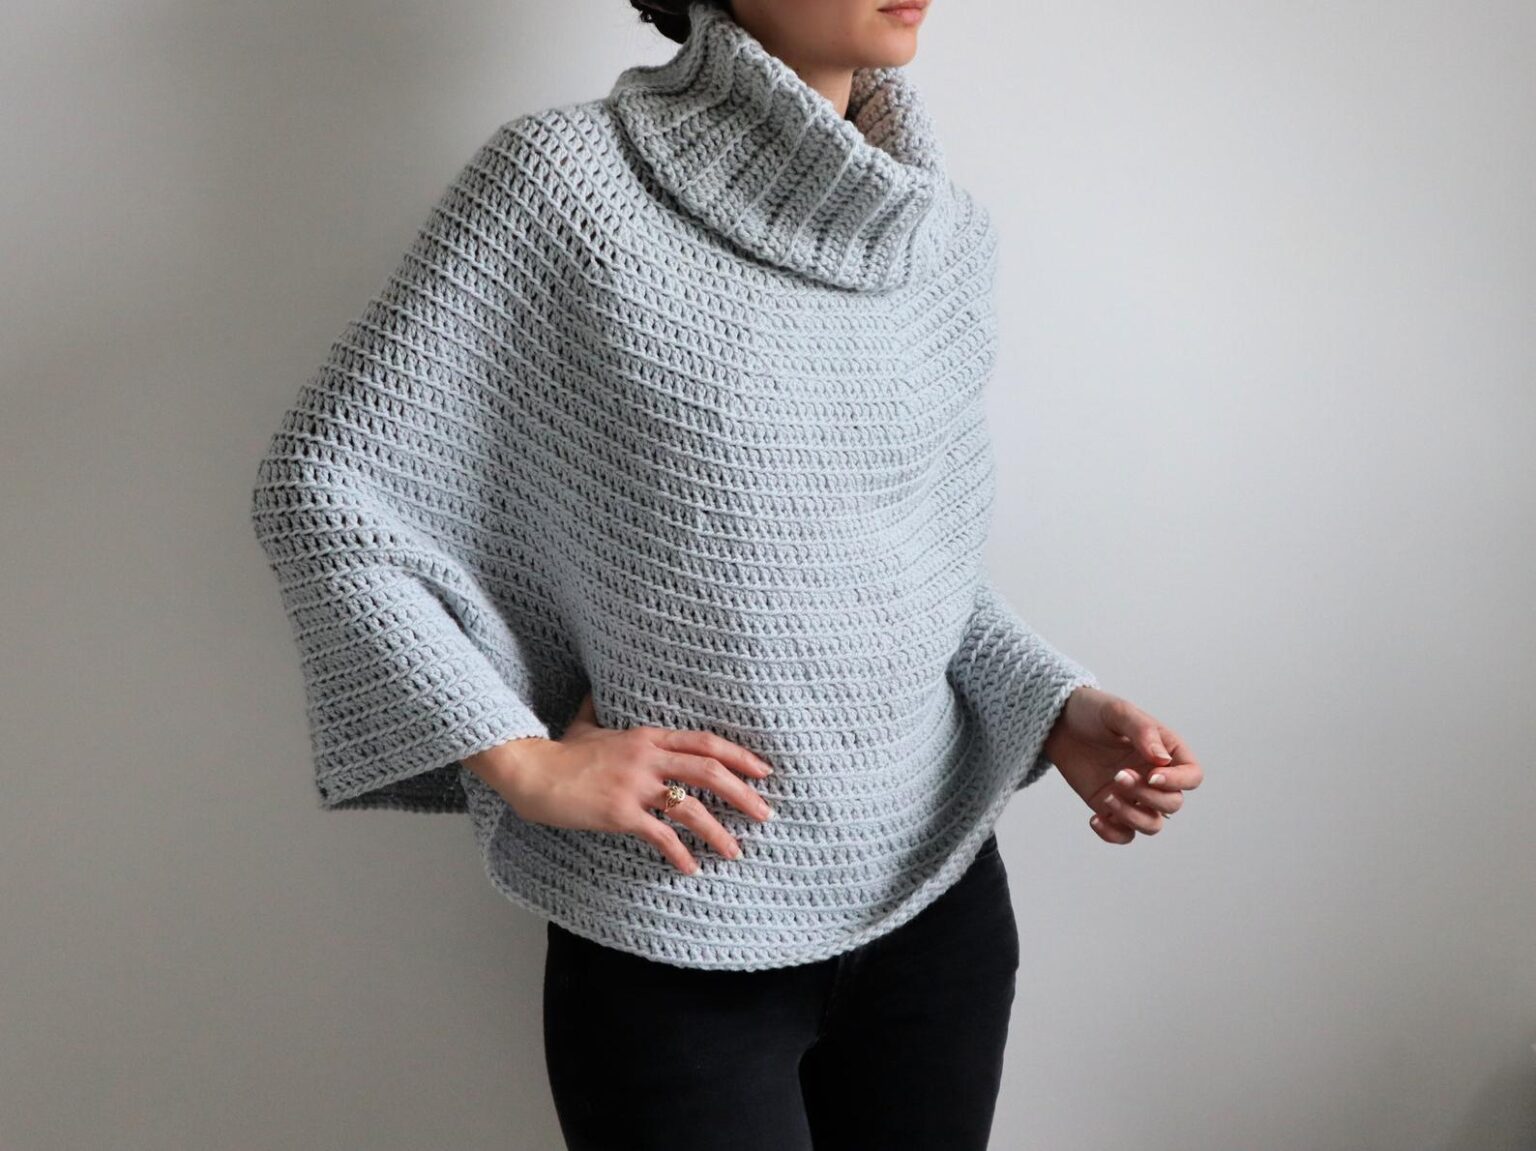 Cowl Neck Capelet – Crochet Poncho Pattern – The Snugglery